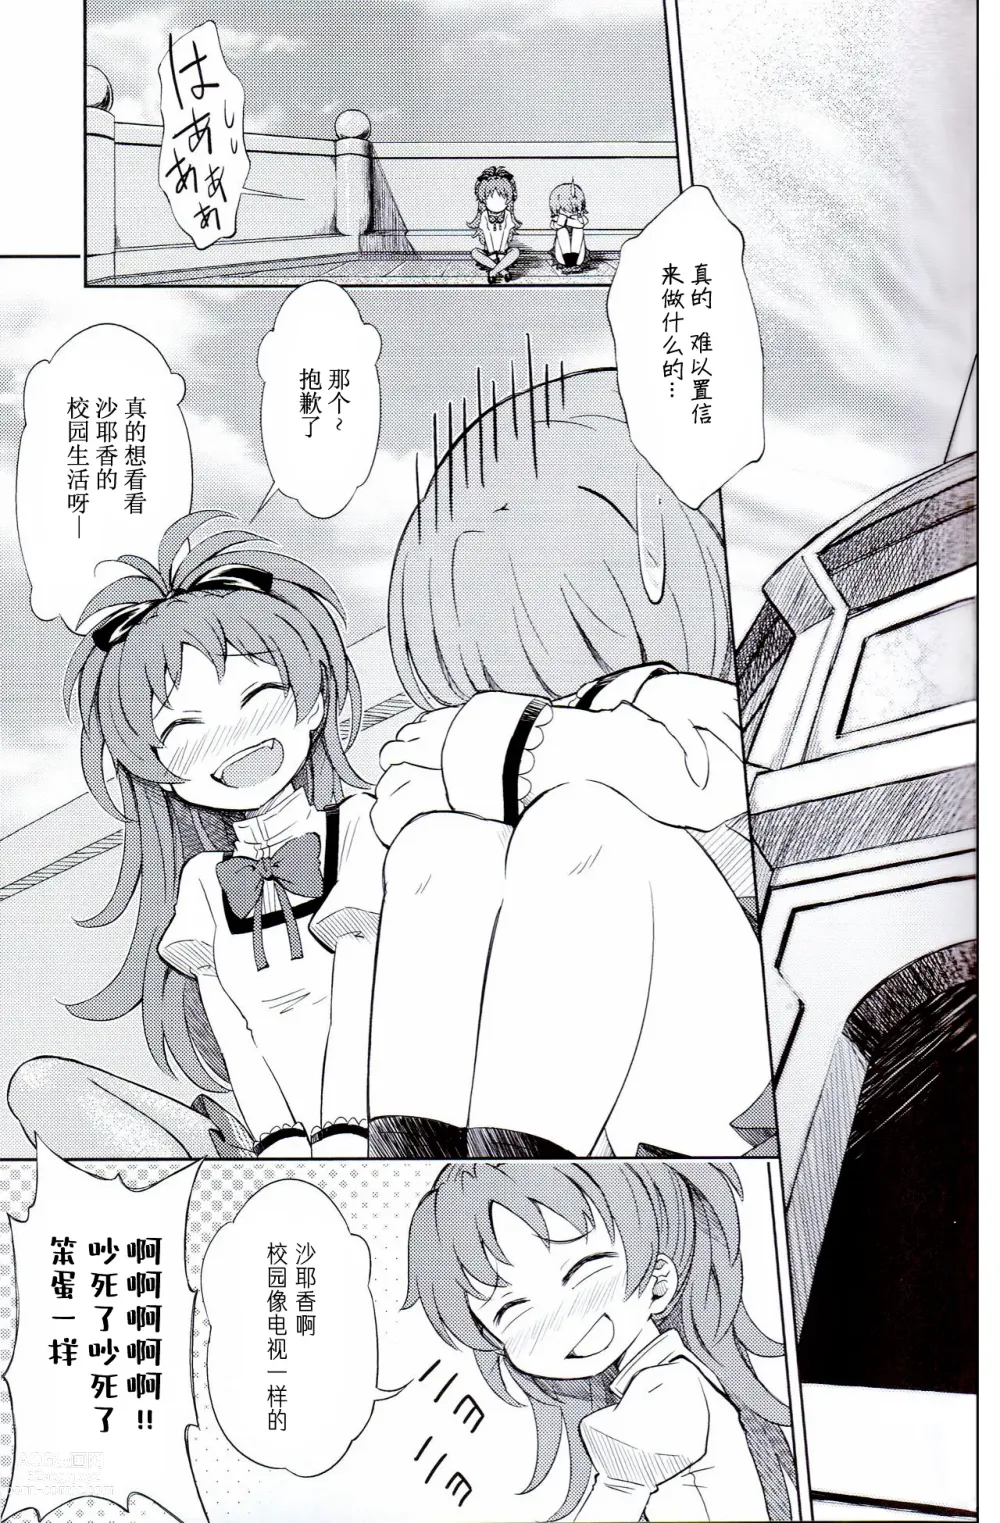 Page 8 of doujinshi Lovely Girls Lily vol. 5